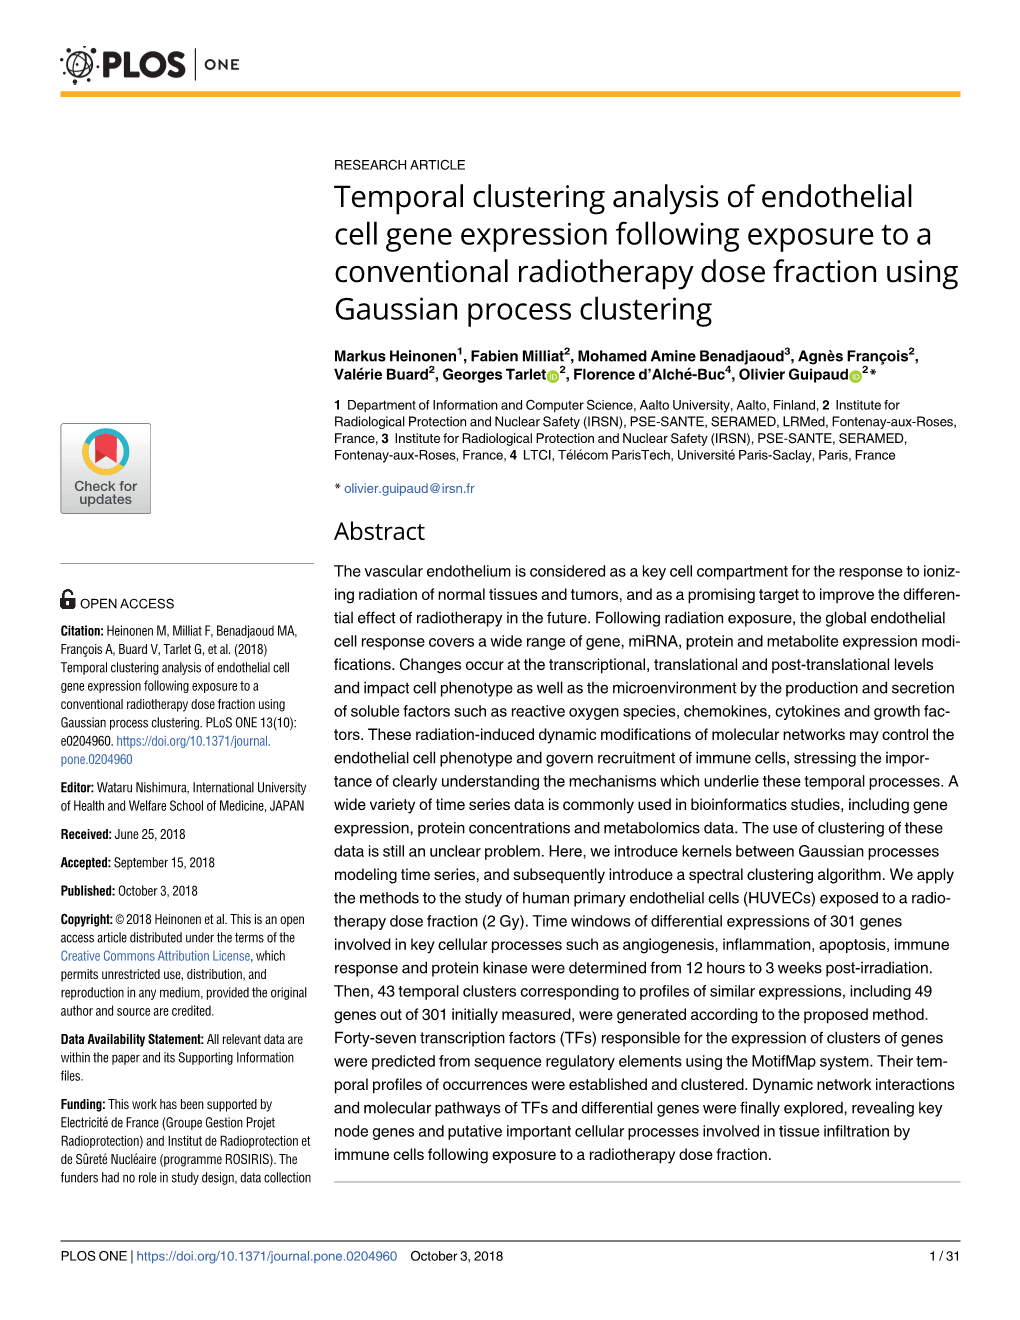 Temporal Clustering Analysis of Endothelial Cell Gene Expression Following Exposure to a Conventional Radiotherapy Dose Fraction Using Gaussian Process Clustering